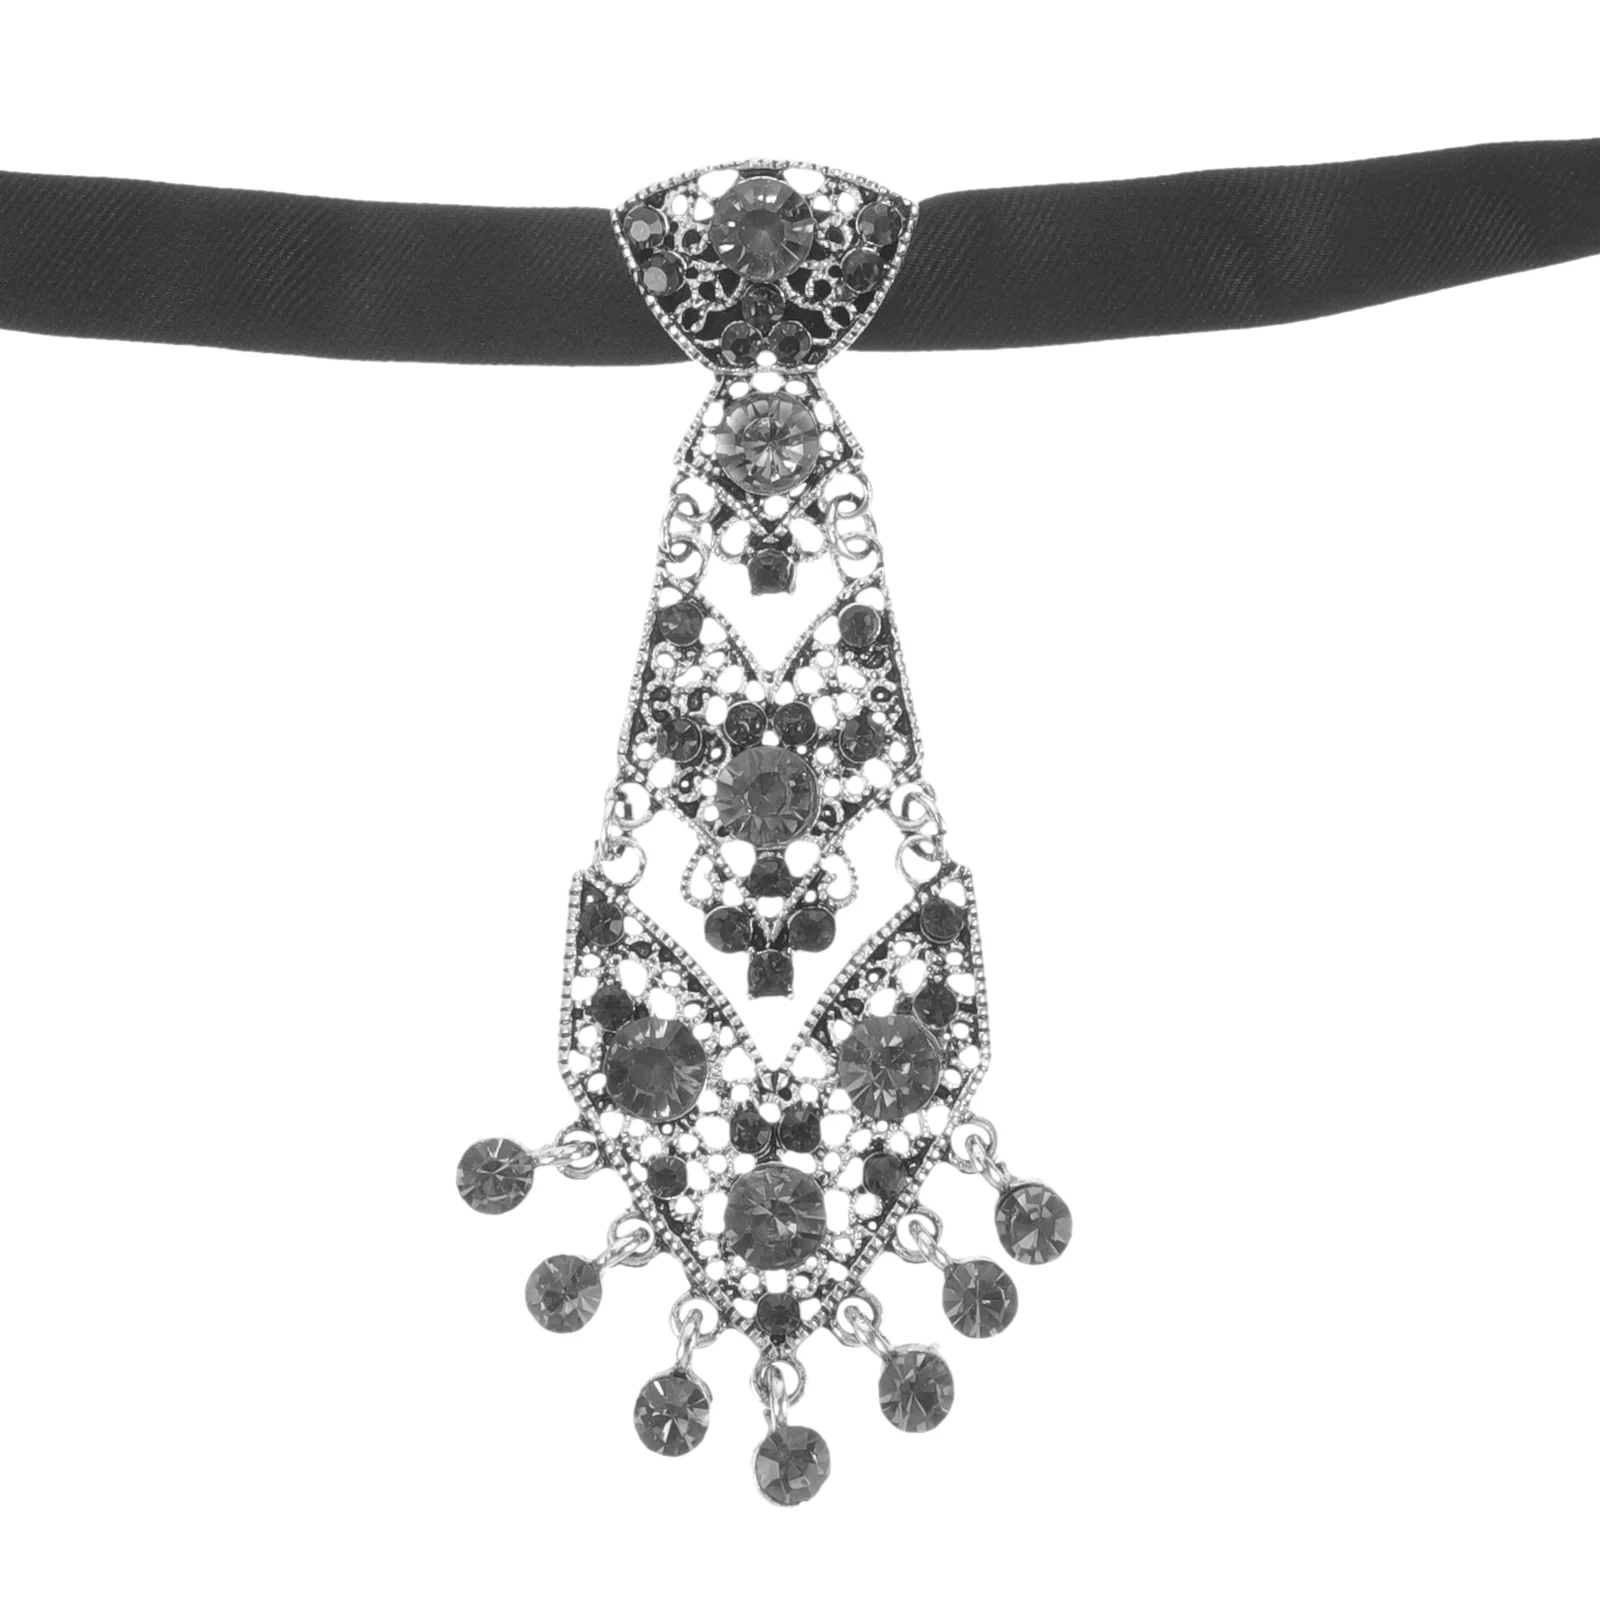 

Diamond-encrusted Small Tie Decorative Sequin Ties for Men Necktie Party Personality Rhinestone Glitter and Women